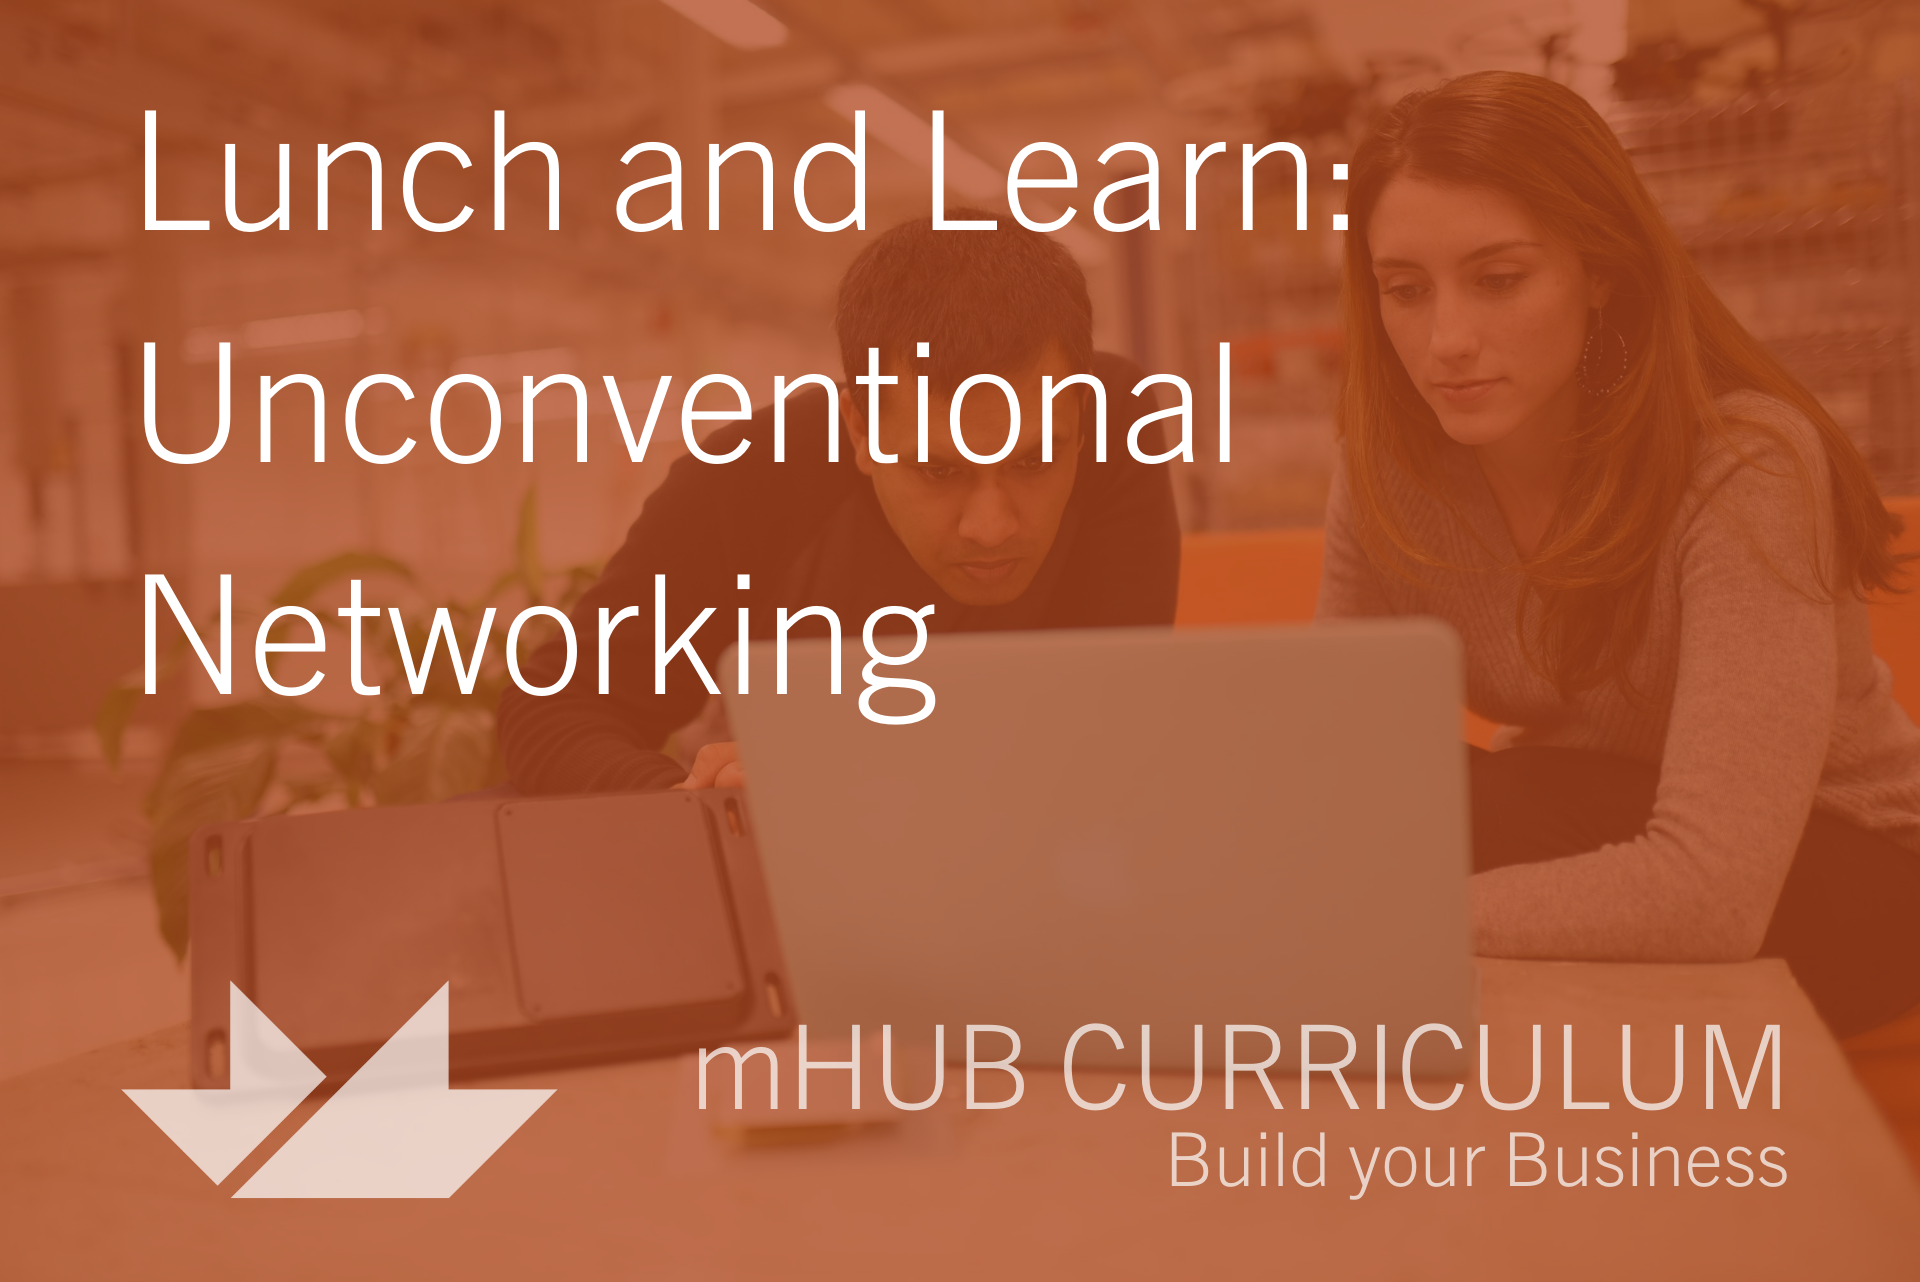 Lunch and Learn: Unconventional Networking 